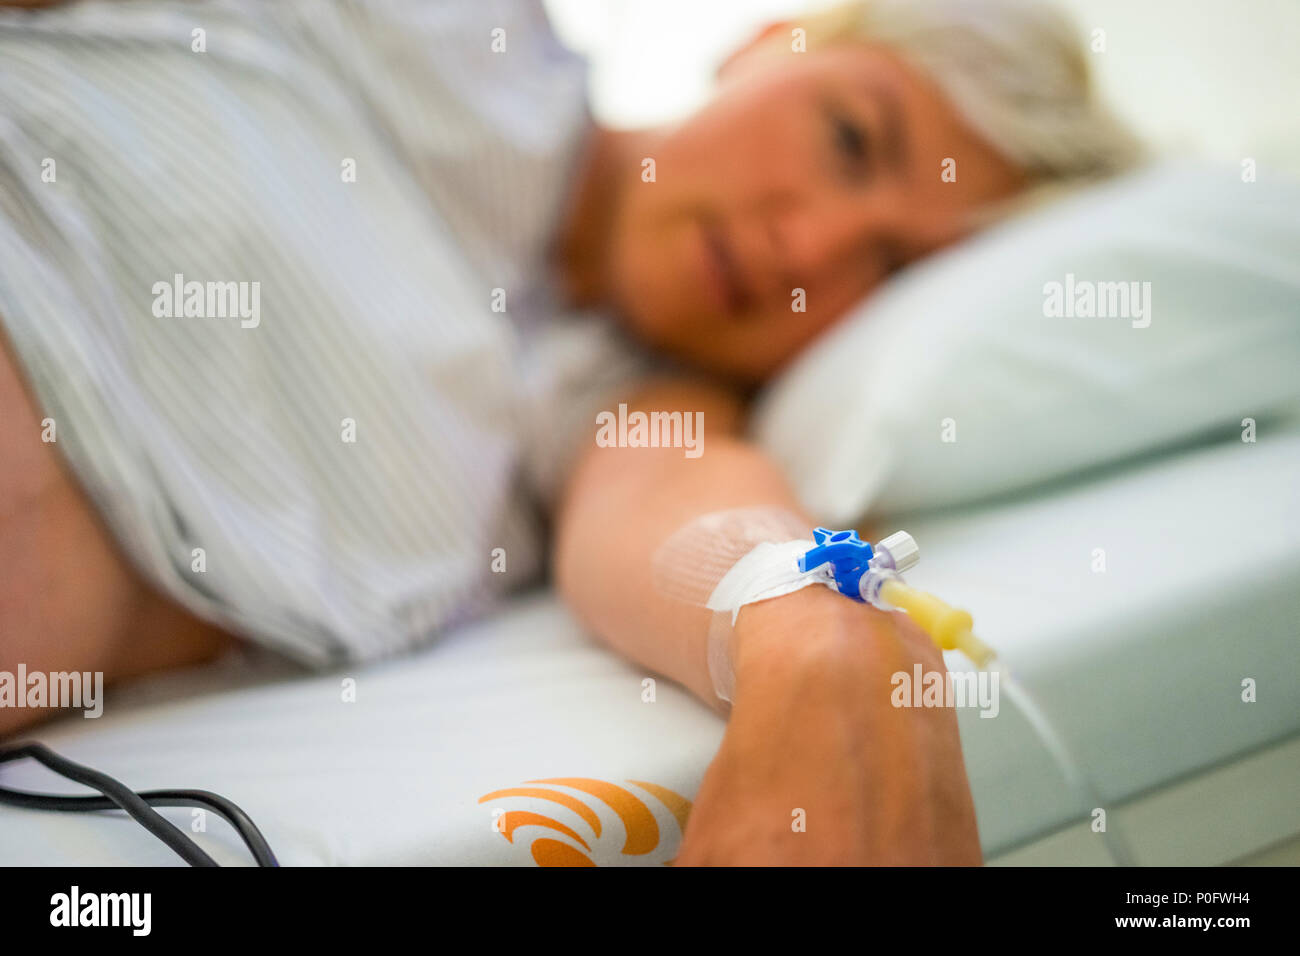 Peripheral venous catheter on the hand of young Caucasian woman Stock Photo